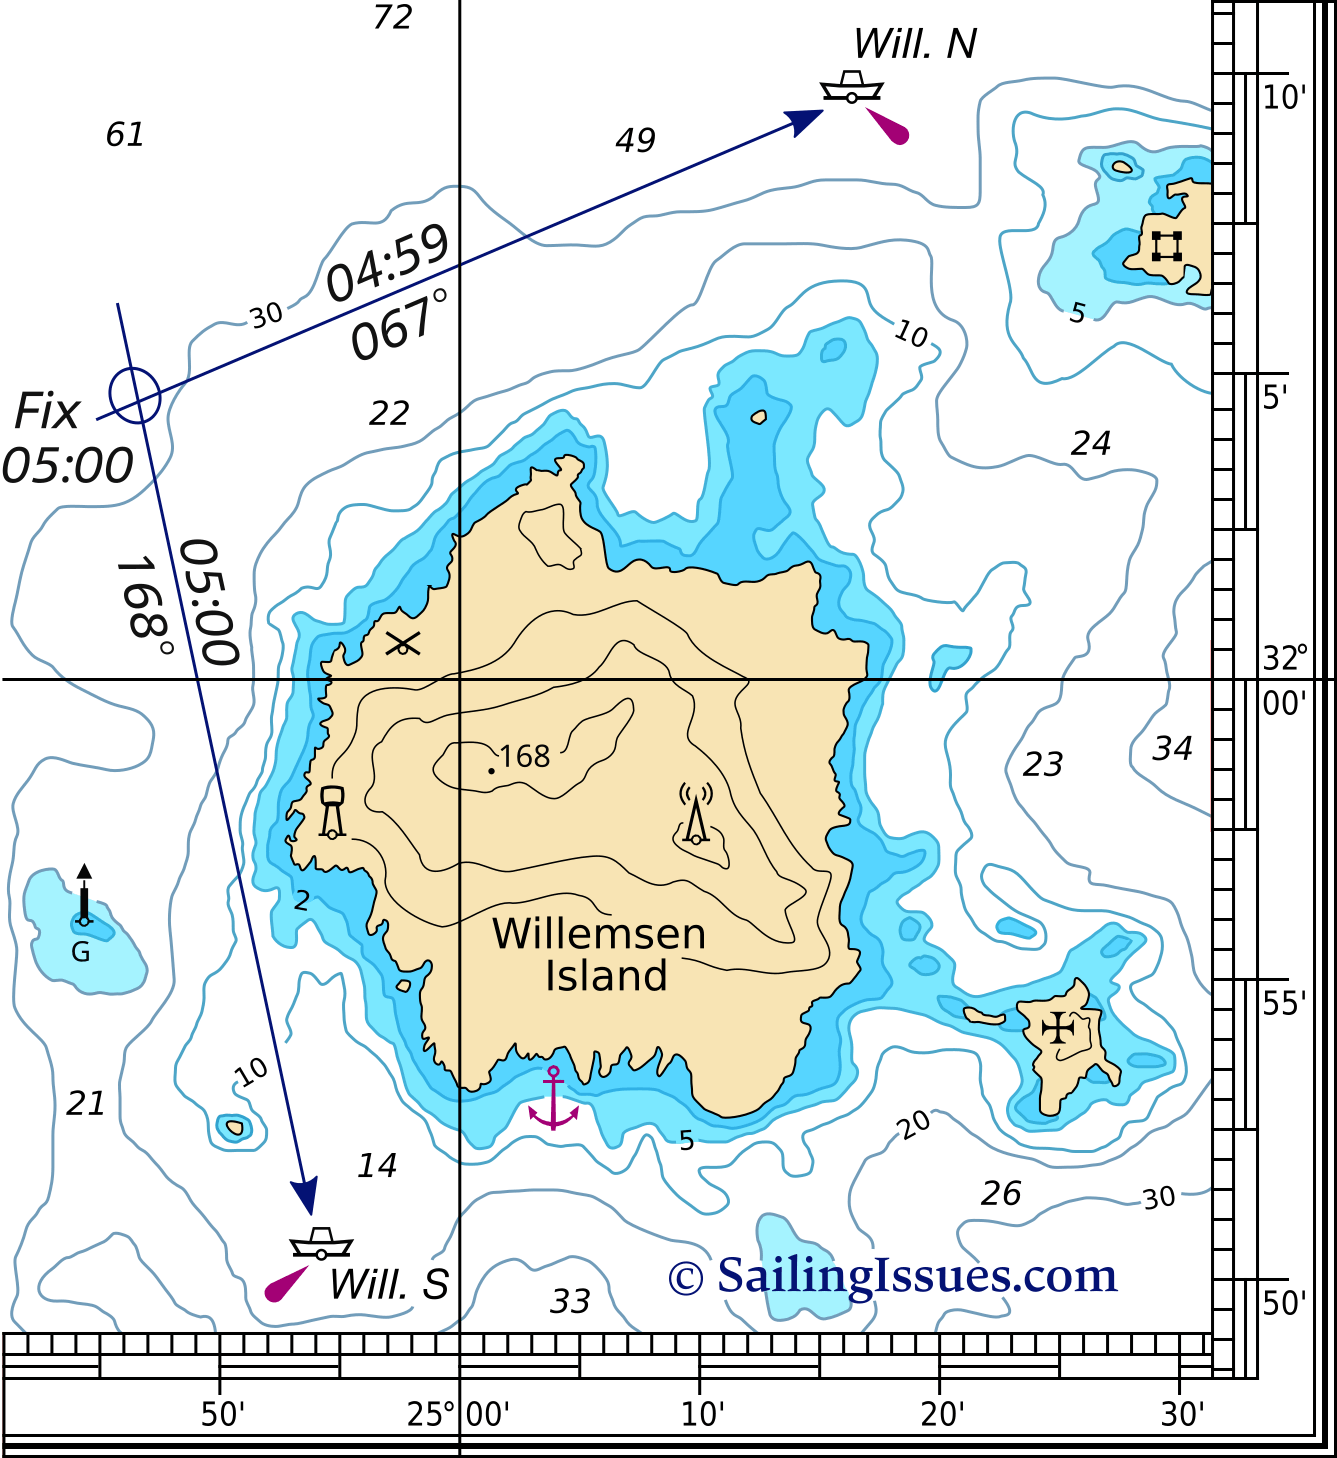 Plotting a position fix in the nautical chart: navigation